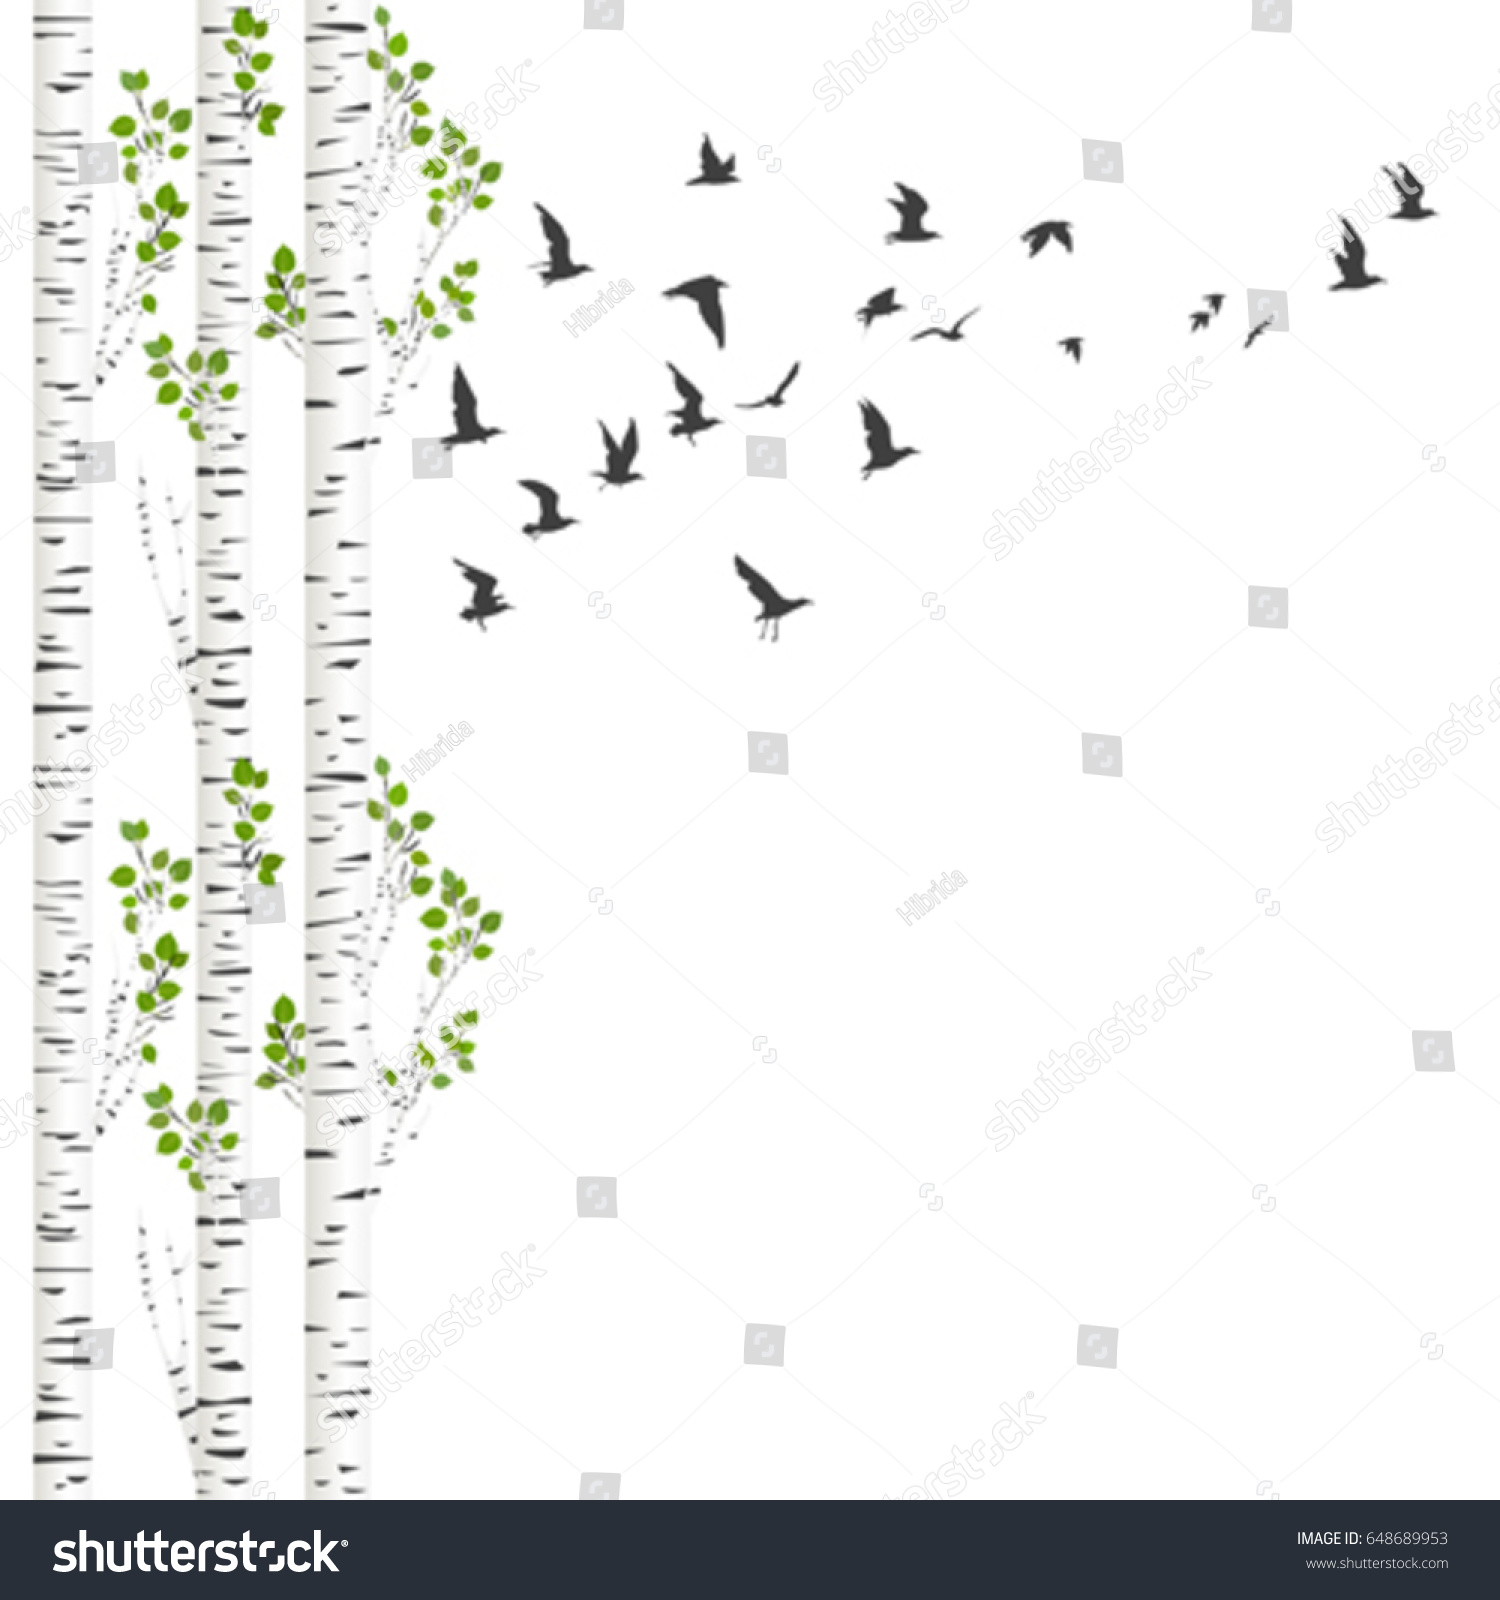 SVG of Background with birch trees and birds flying svg